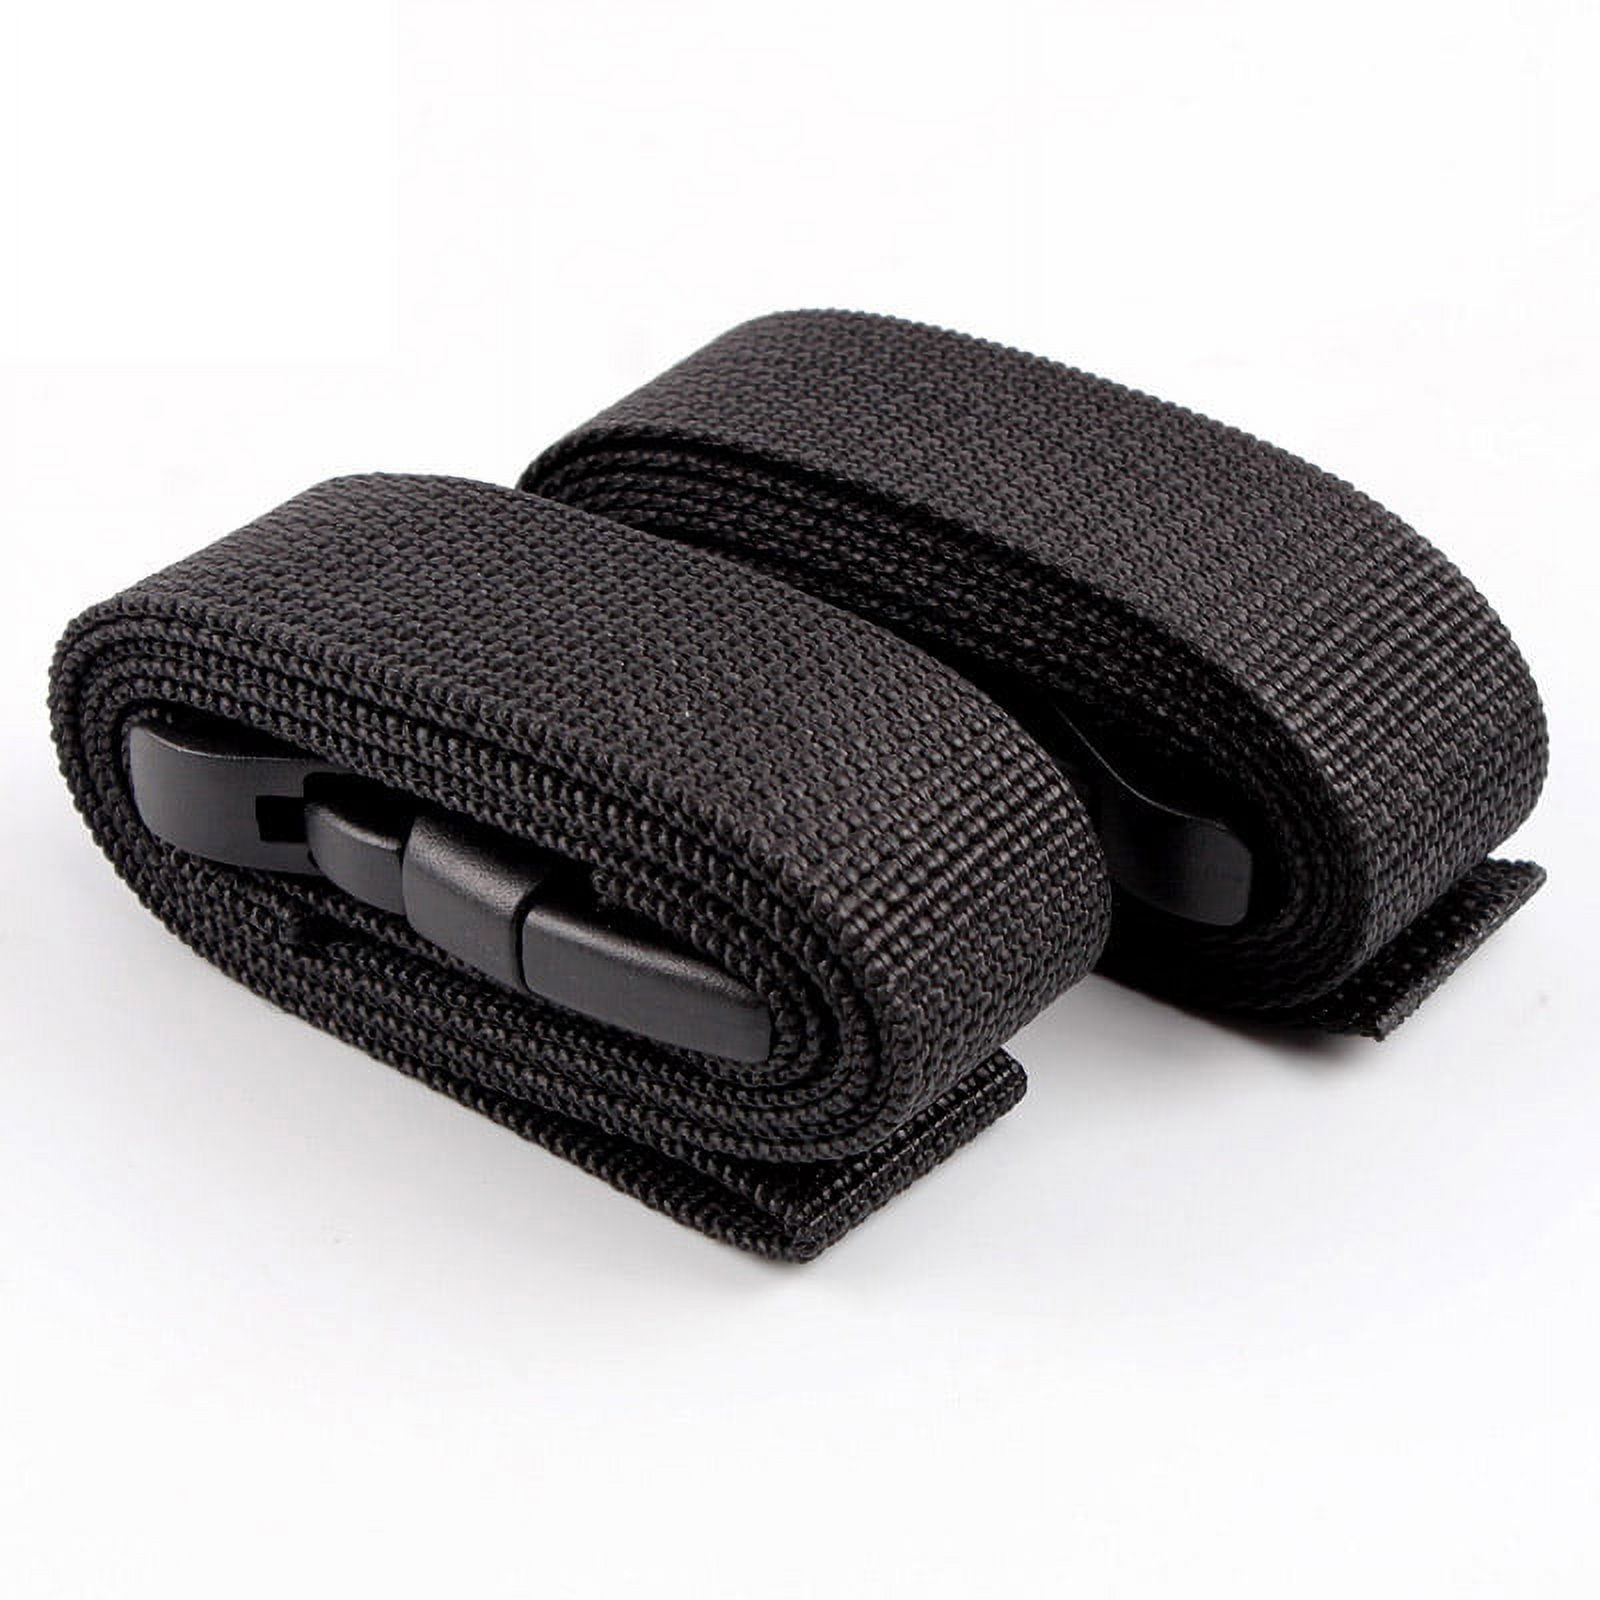 2Pcs Adjustable Nylon Bind Band Strap Utility Strap with Quick